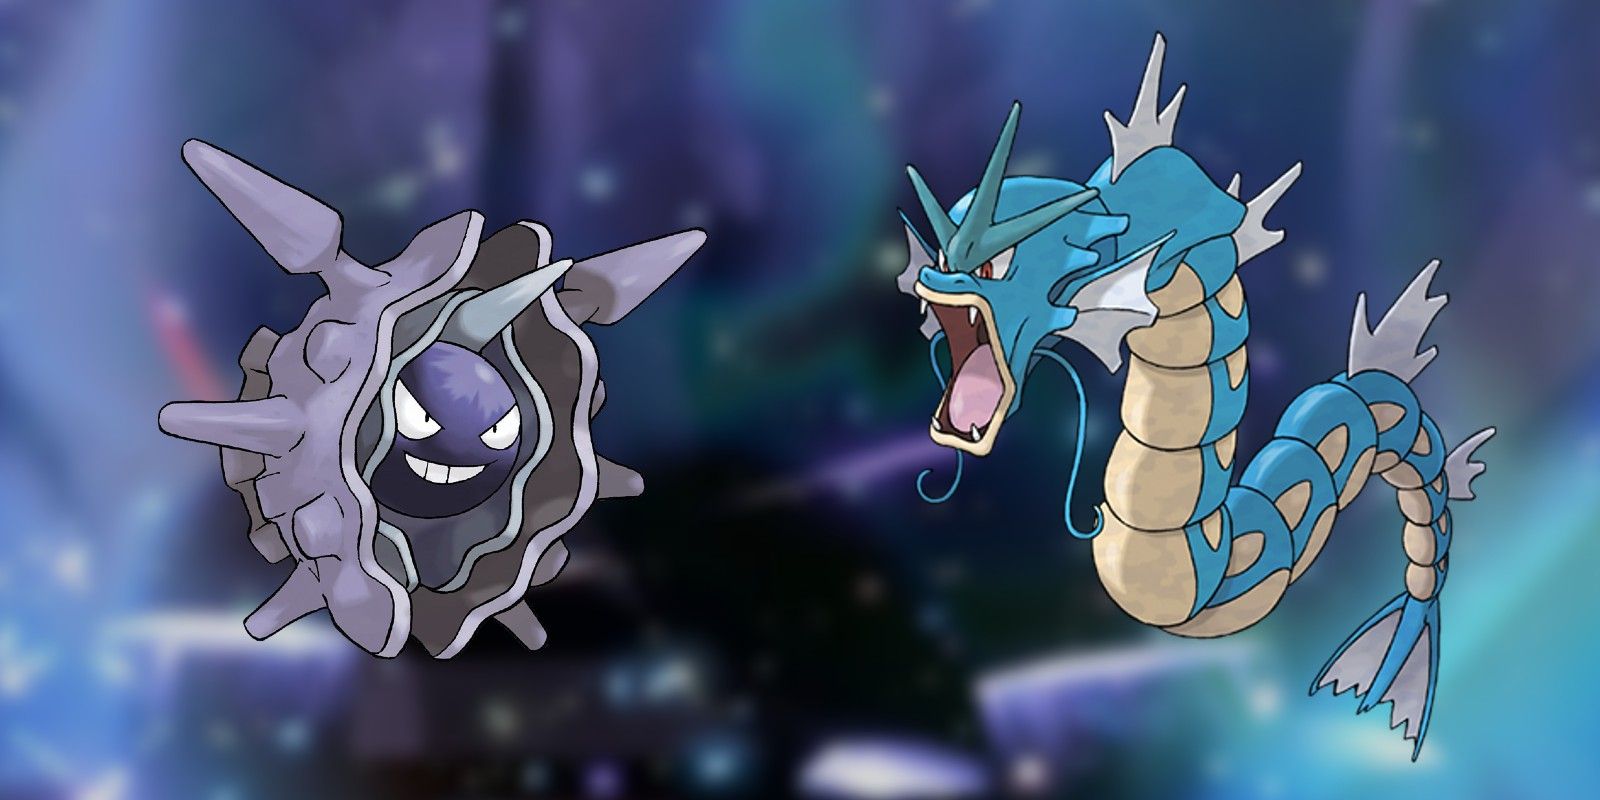 Cloyster and Gyarados are the top two Pokemon to take down the 7 Star Bug Tera Raid Samurott